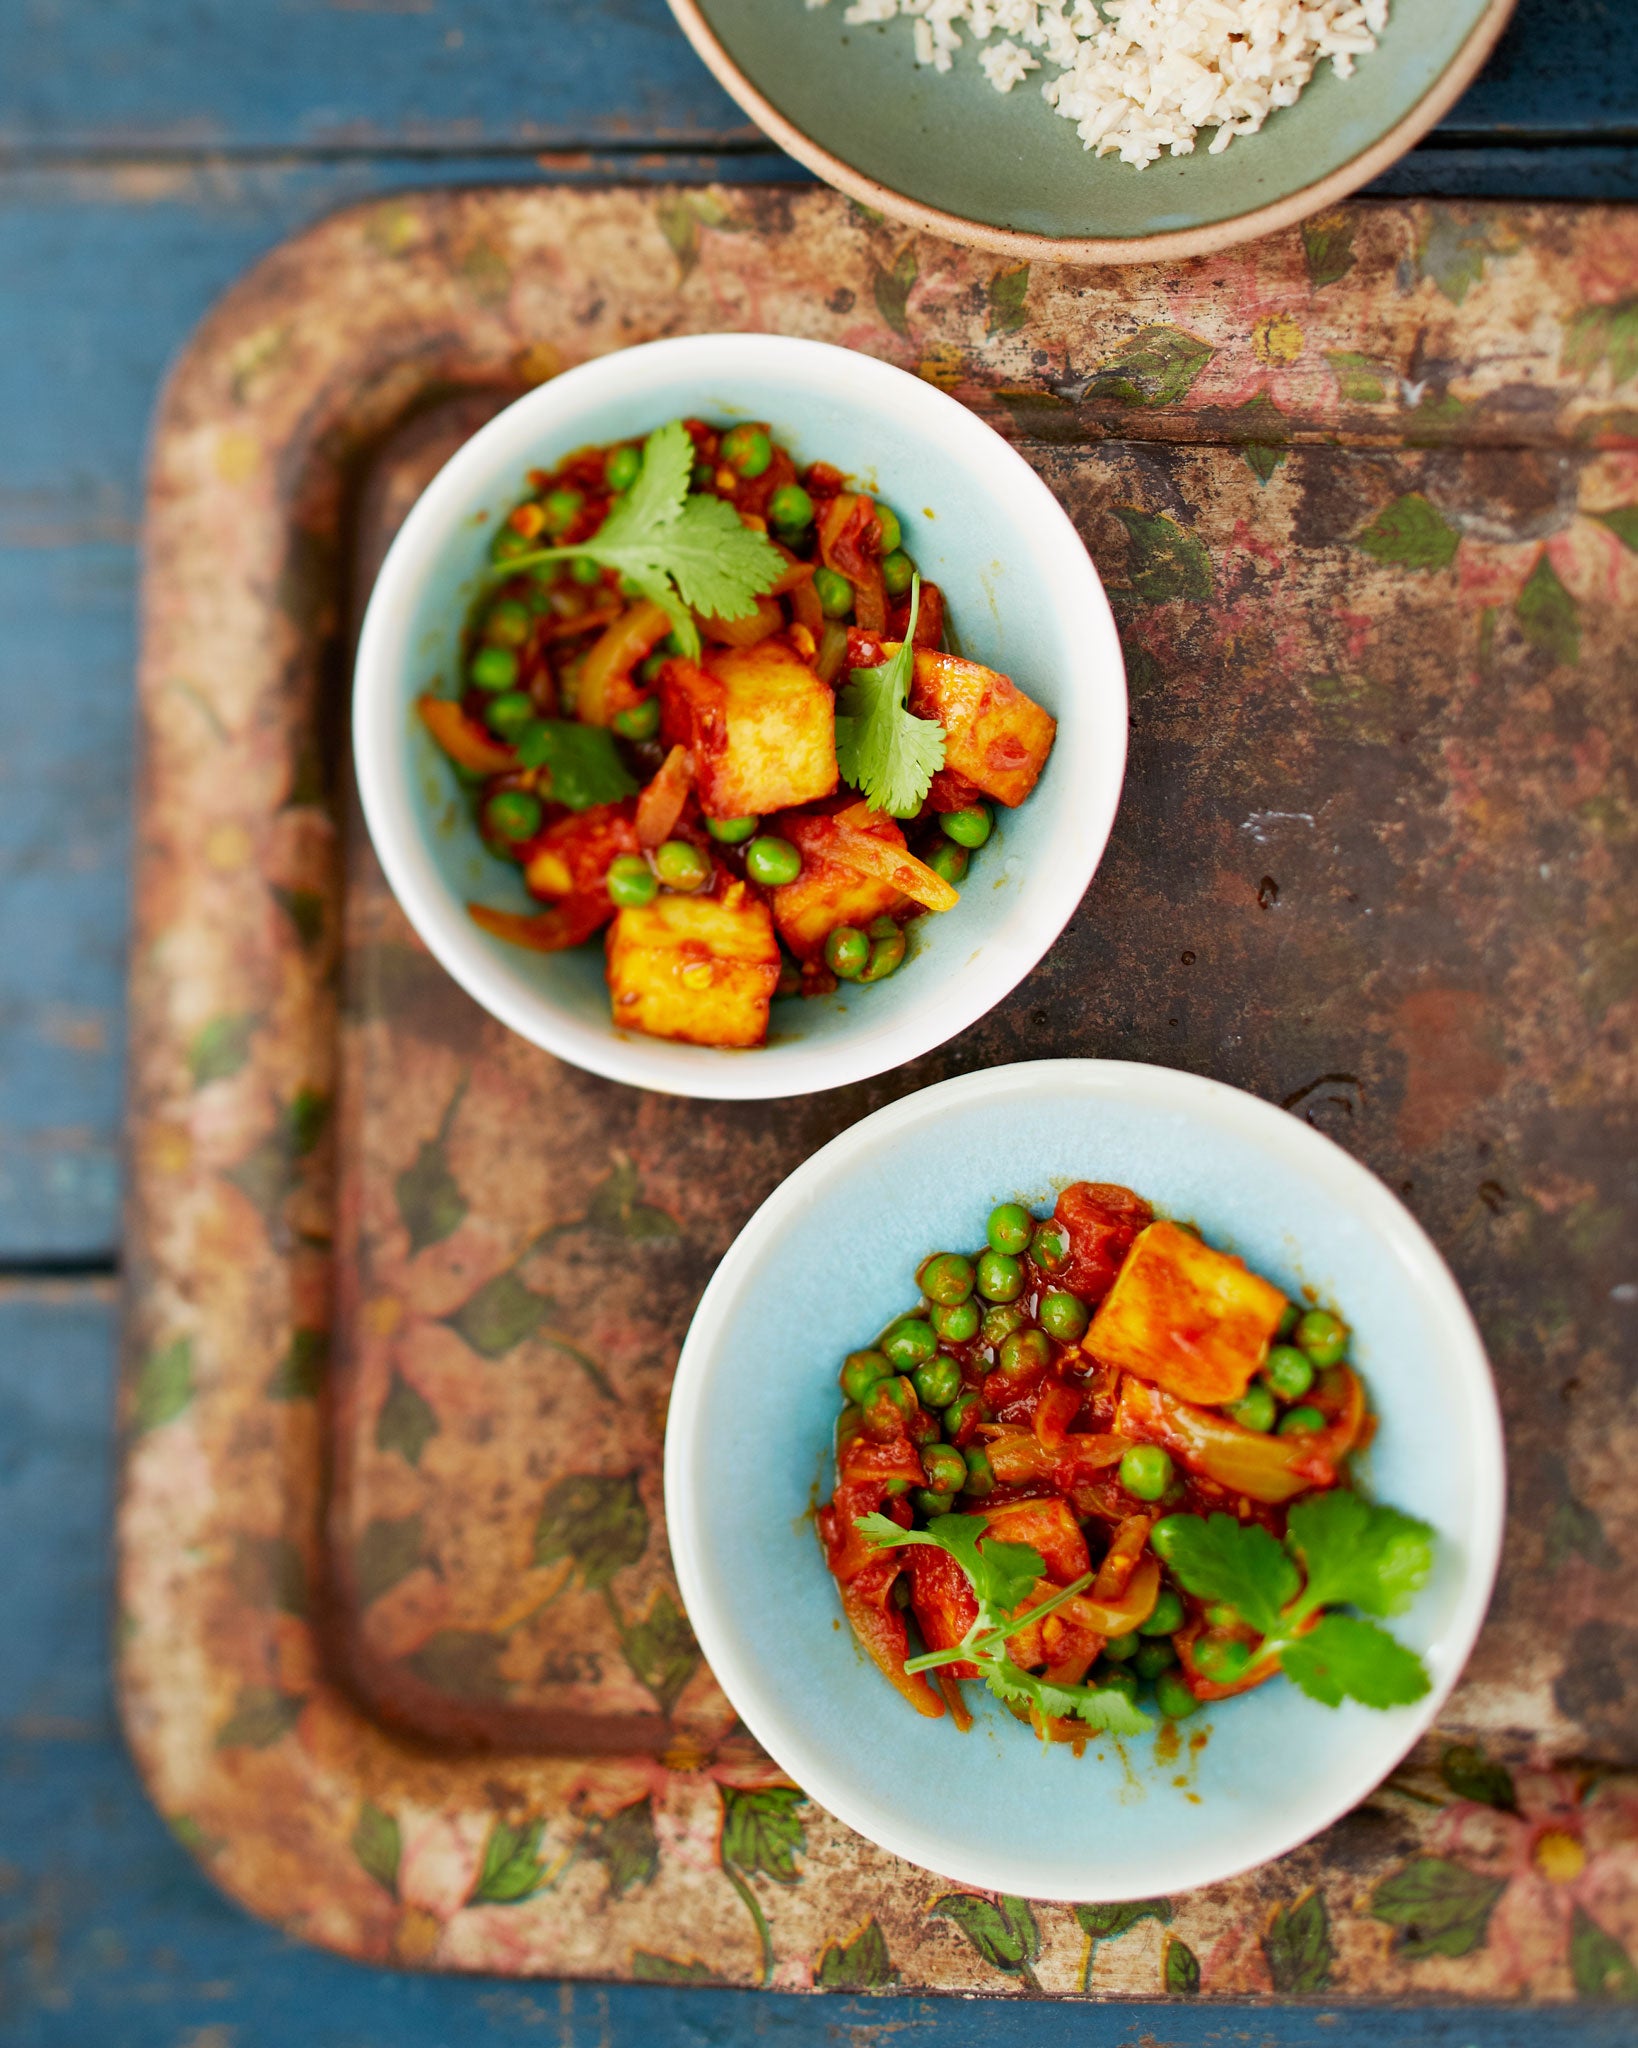 Bill's paneer and pea curry is a light, ghee-free dish